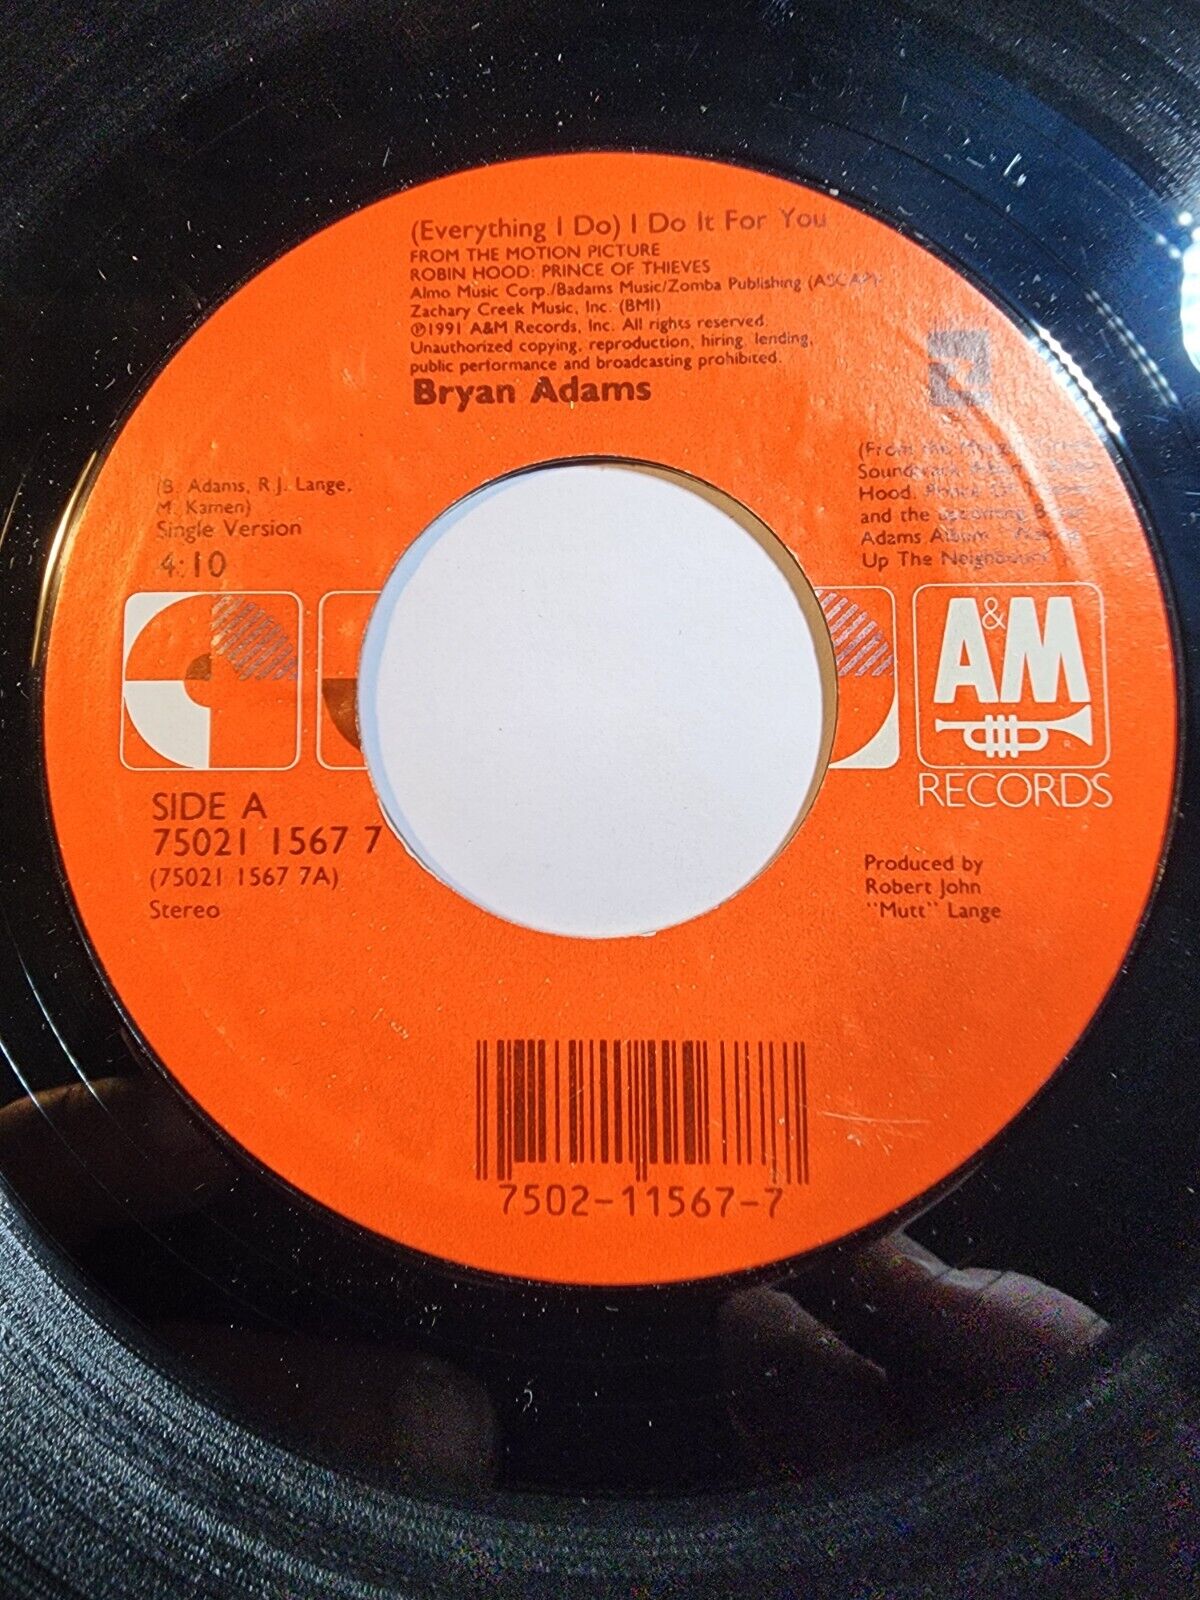 BRYAN ADAMS "EVERYTHING I DO I DO IT FOR YOU" 45 RPM VG+ F258